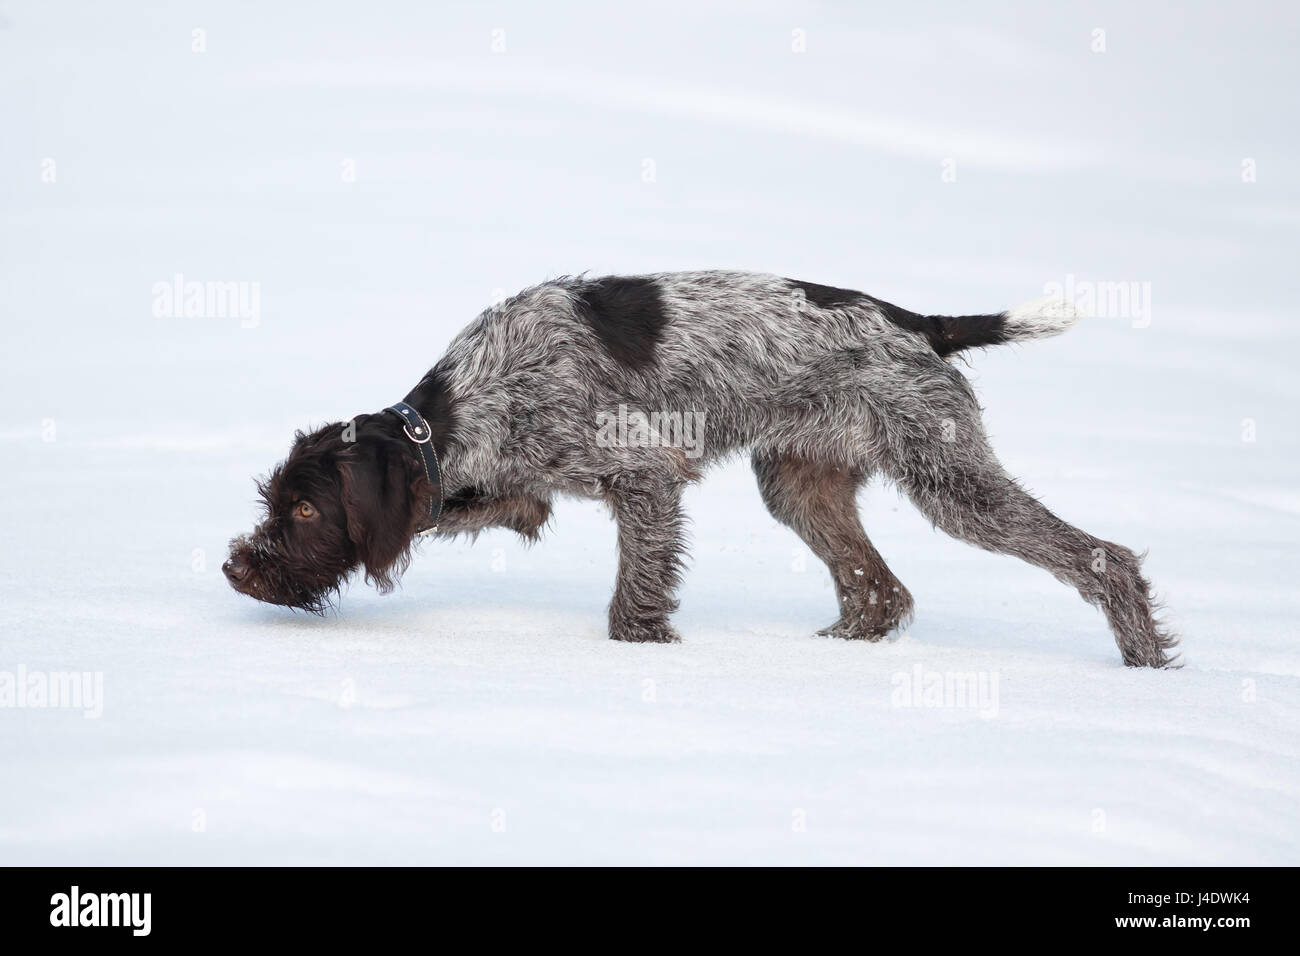 hunting dog sniffing a game animal in winter Stock Photo